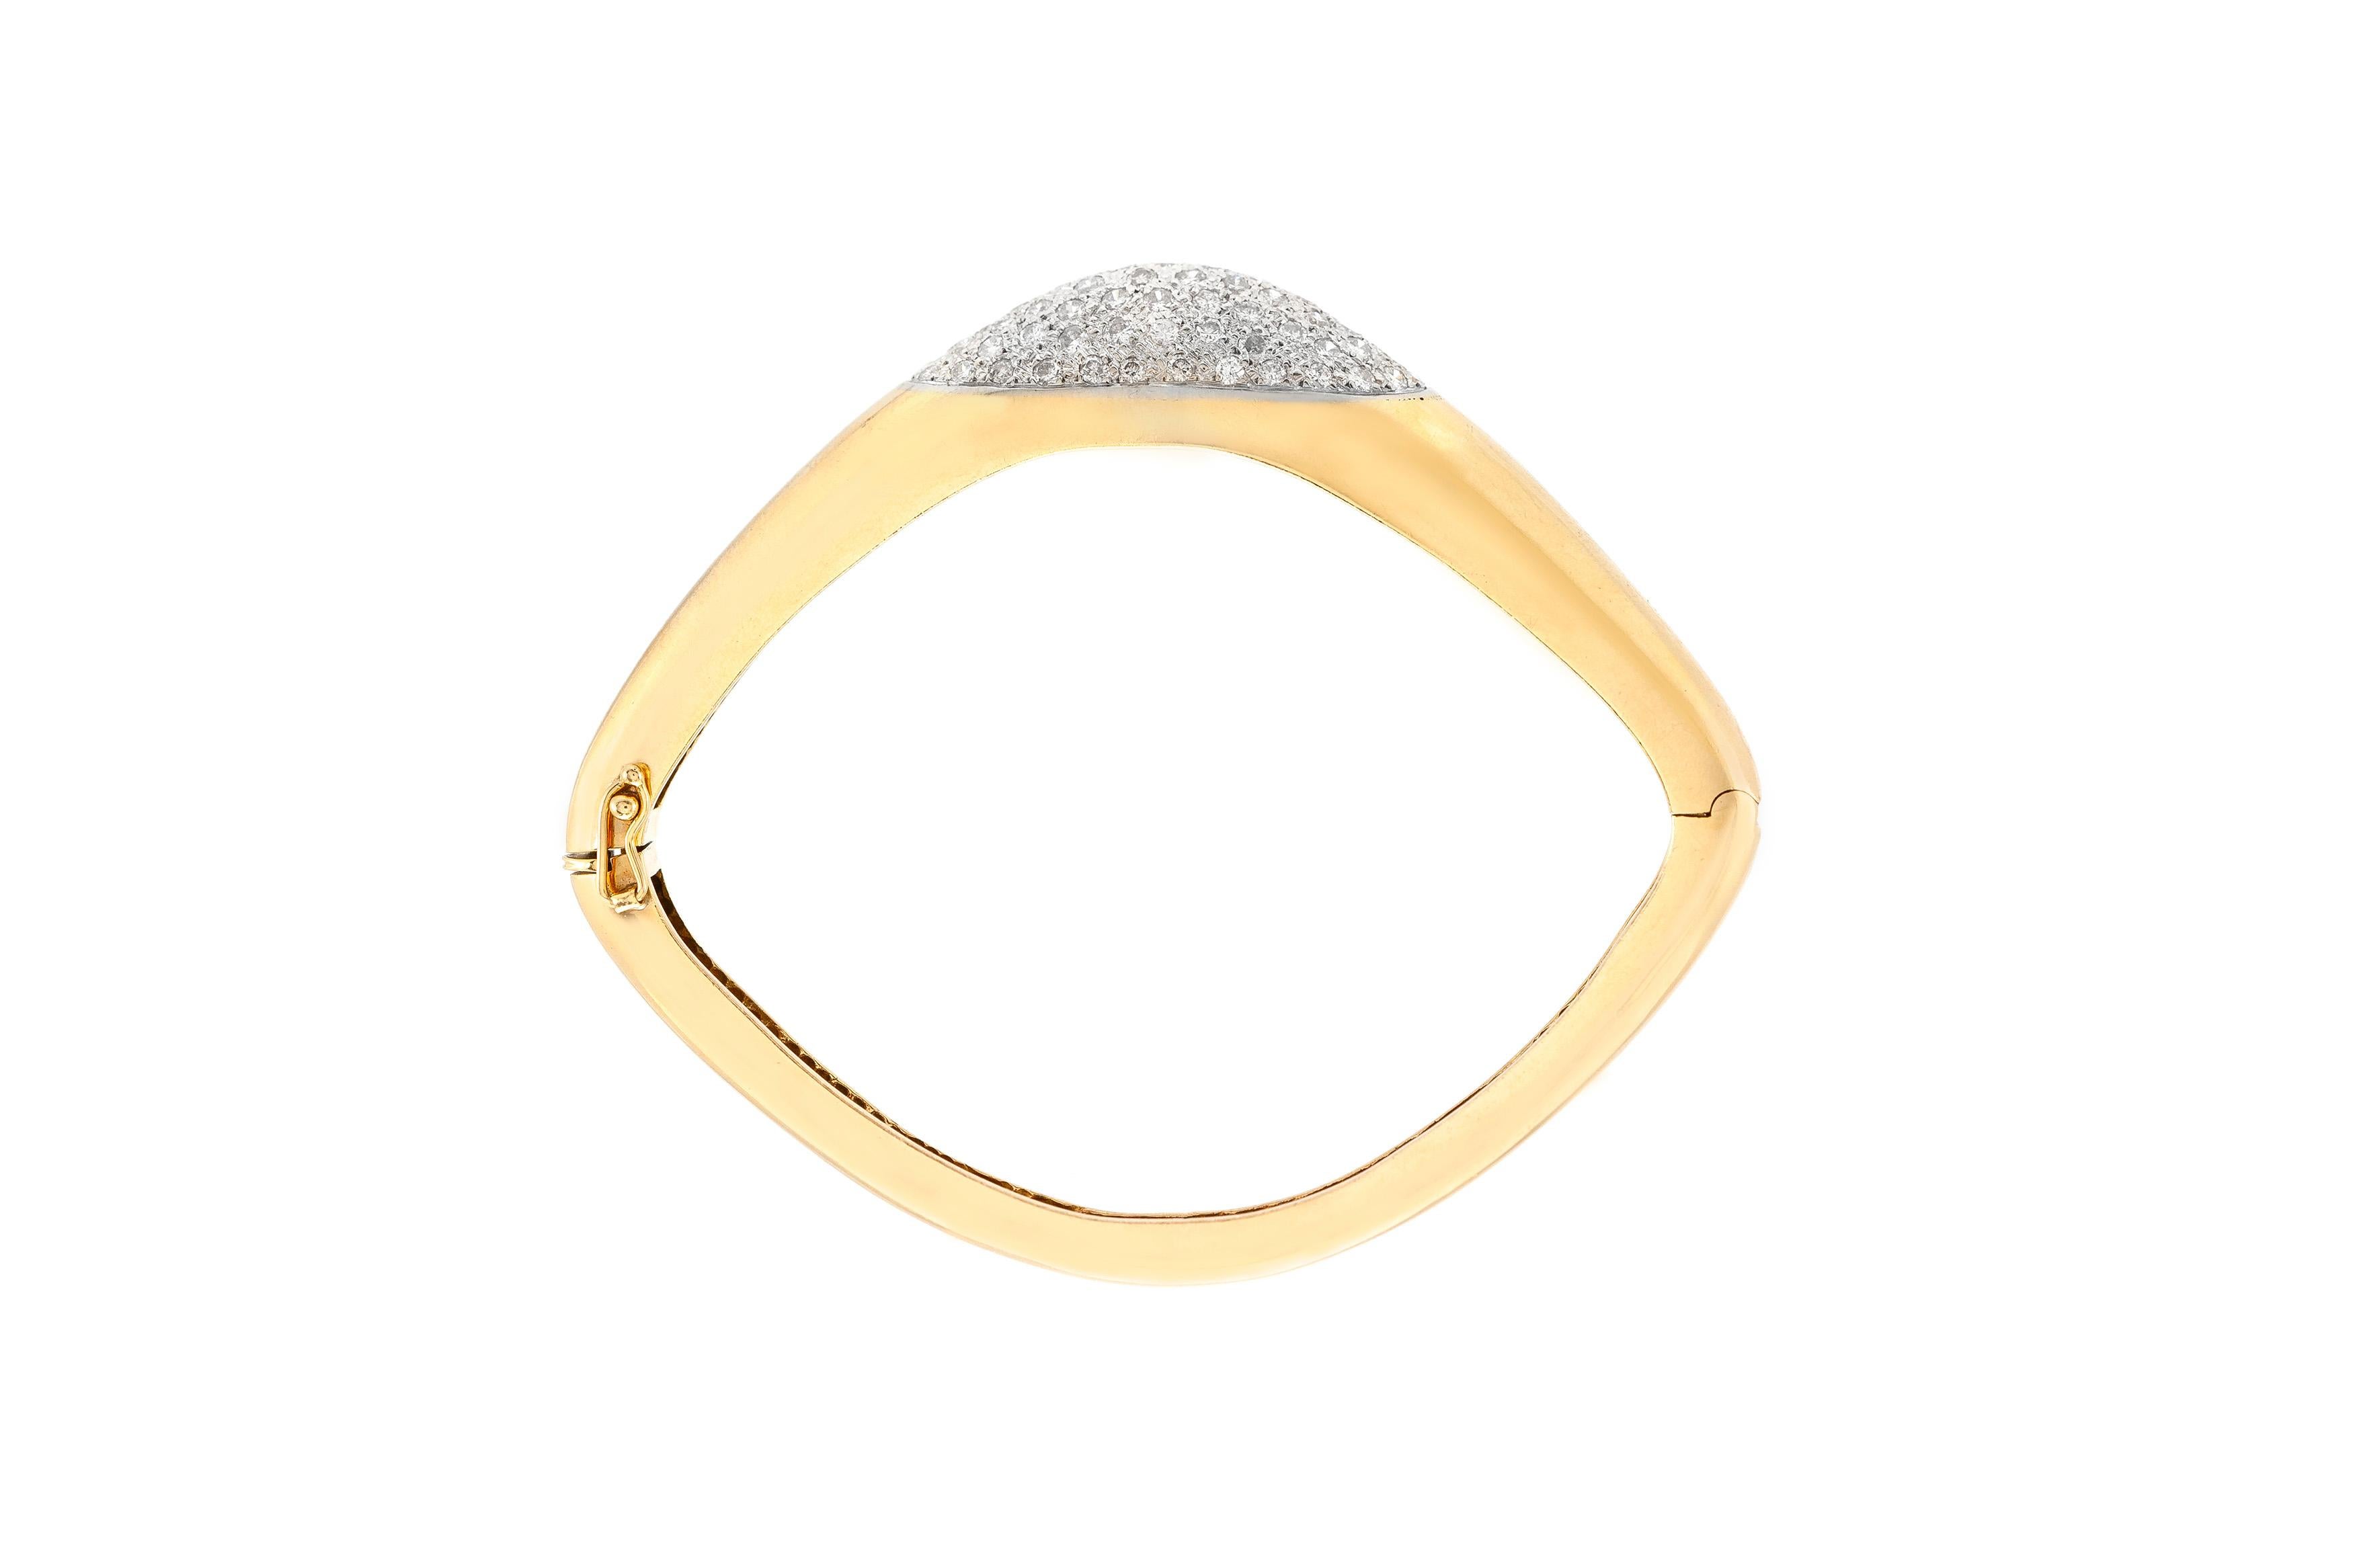 The bracelet is finely crafted in 14k yellow gold with diamonds weighing approximately total of 3.95 carat.